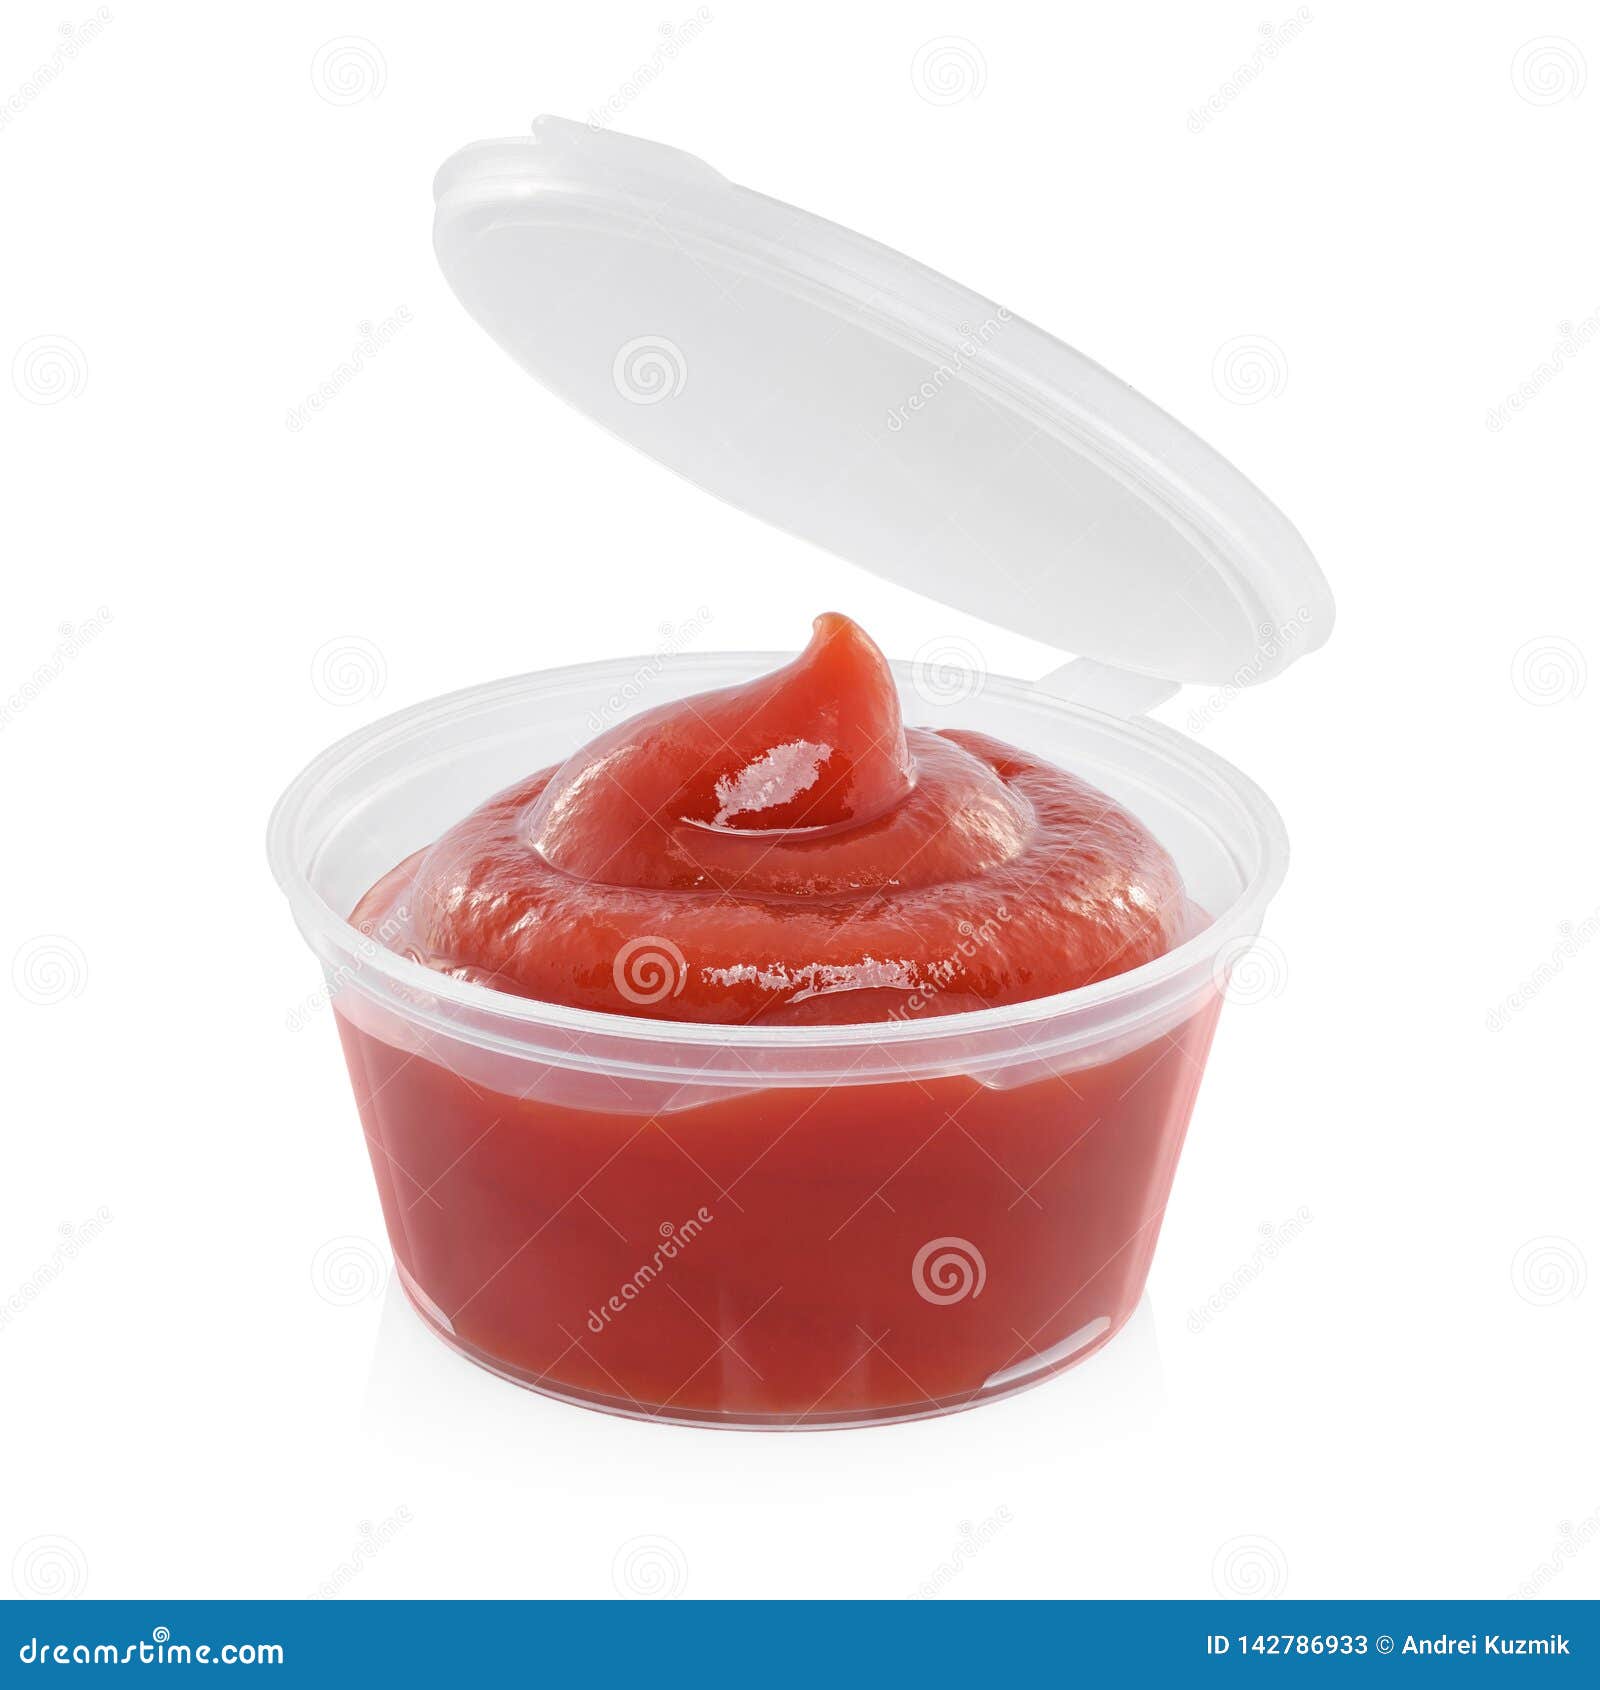 Ketchup Container Isolated on White Stock Image - Image of ketchup,  restaurant: 142786933